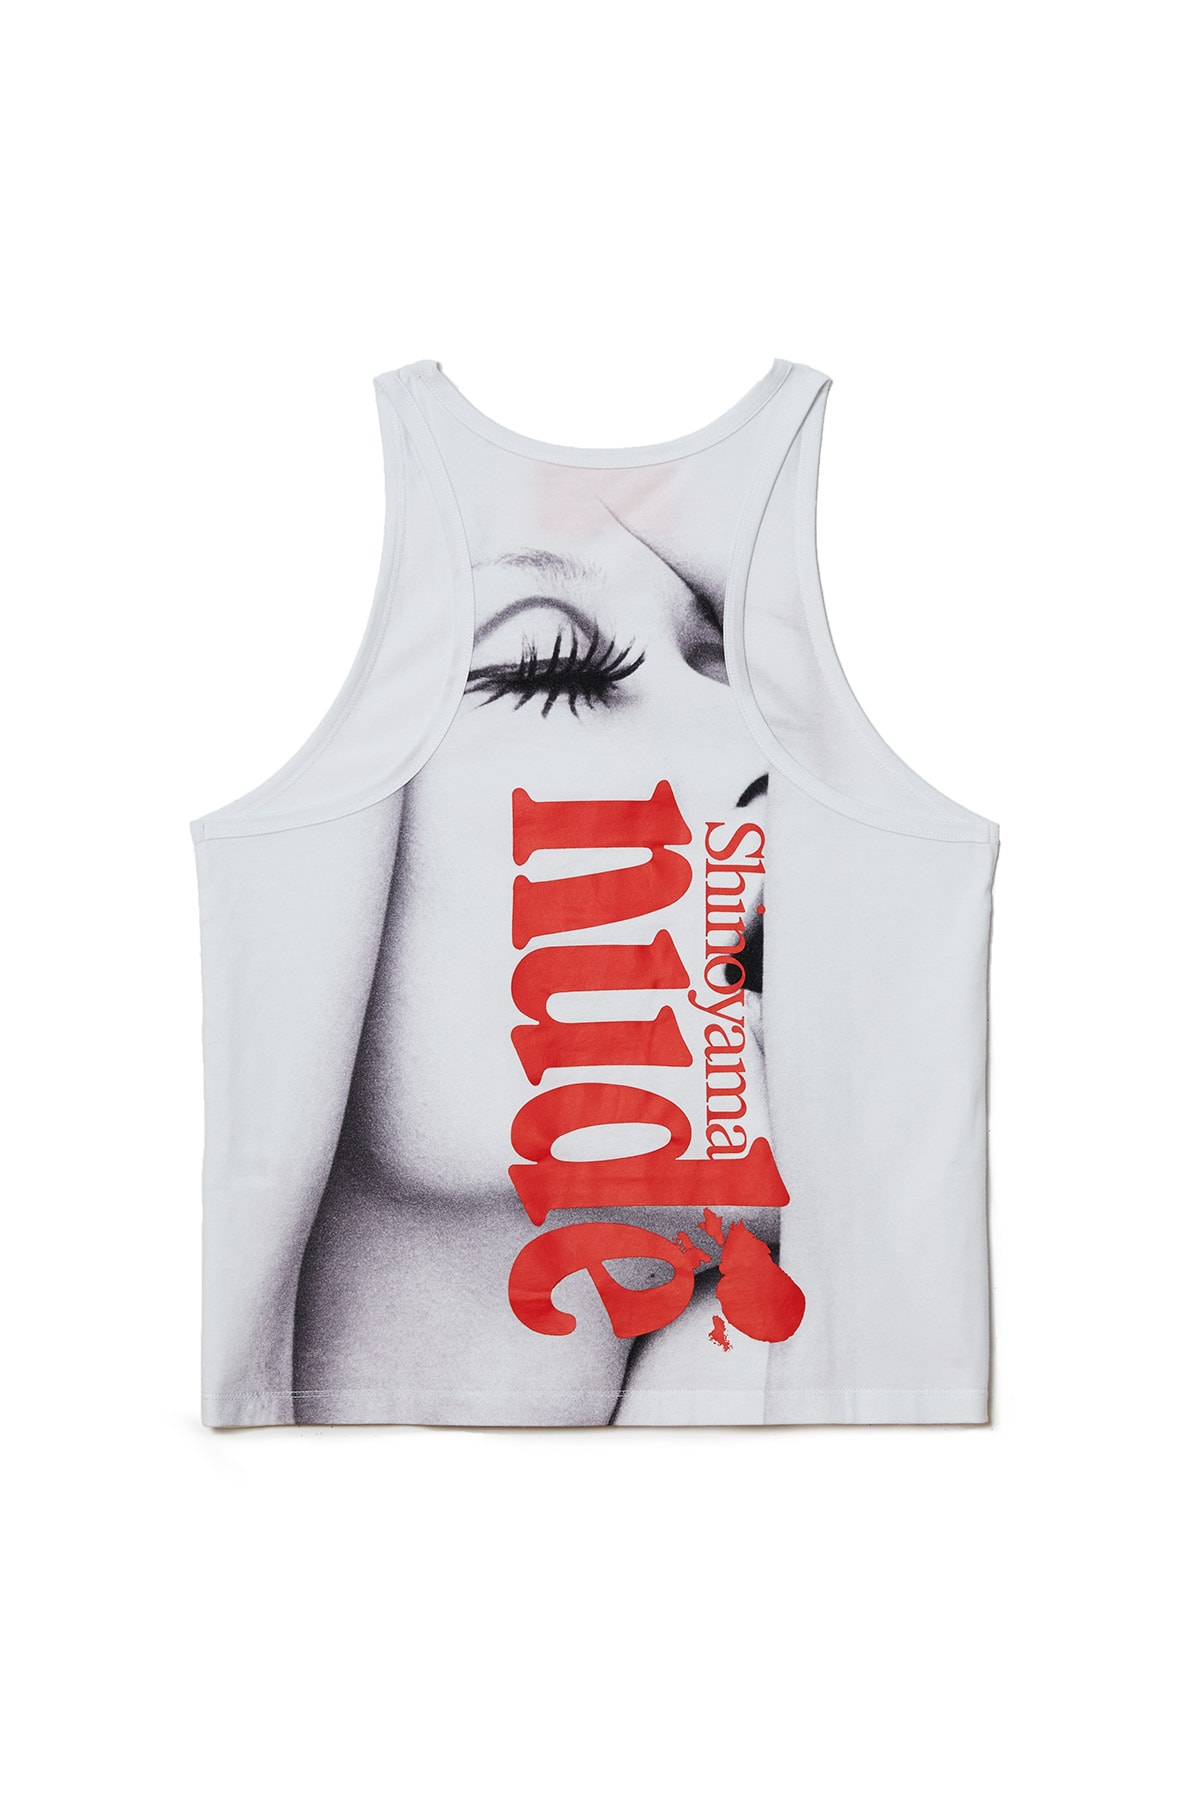 Opening Ceremony Kishin Shinoyama capsule collaboration collection nude photographs japanese tee shirts bag tote may 22 2018 drop release date